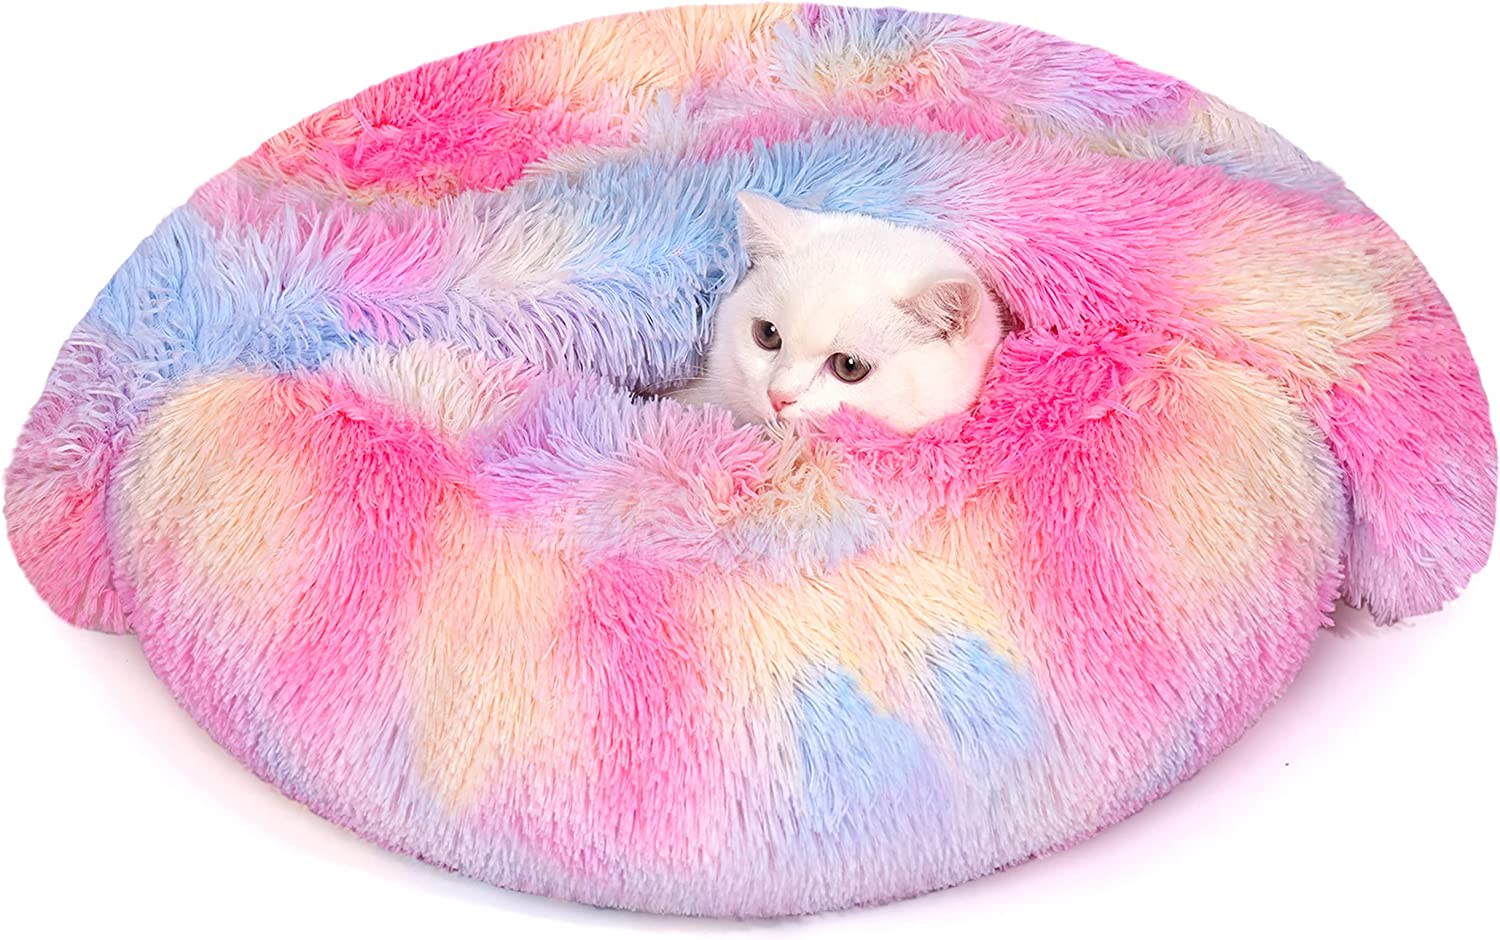 Pet Bed: Washable, Anti-Anxiety, Comfort for Cats and Dogs